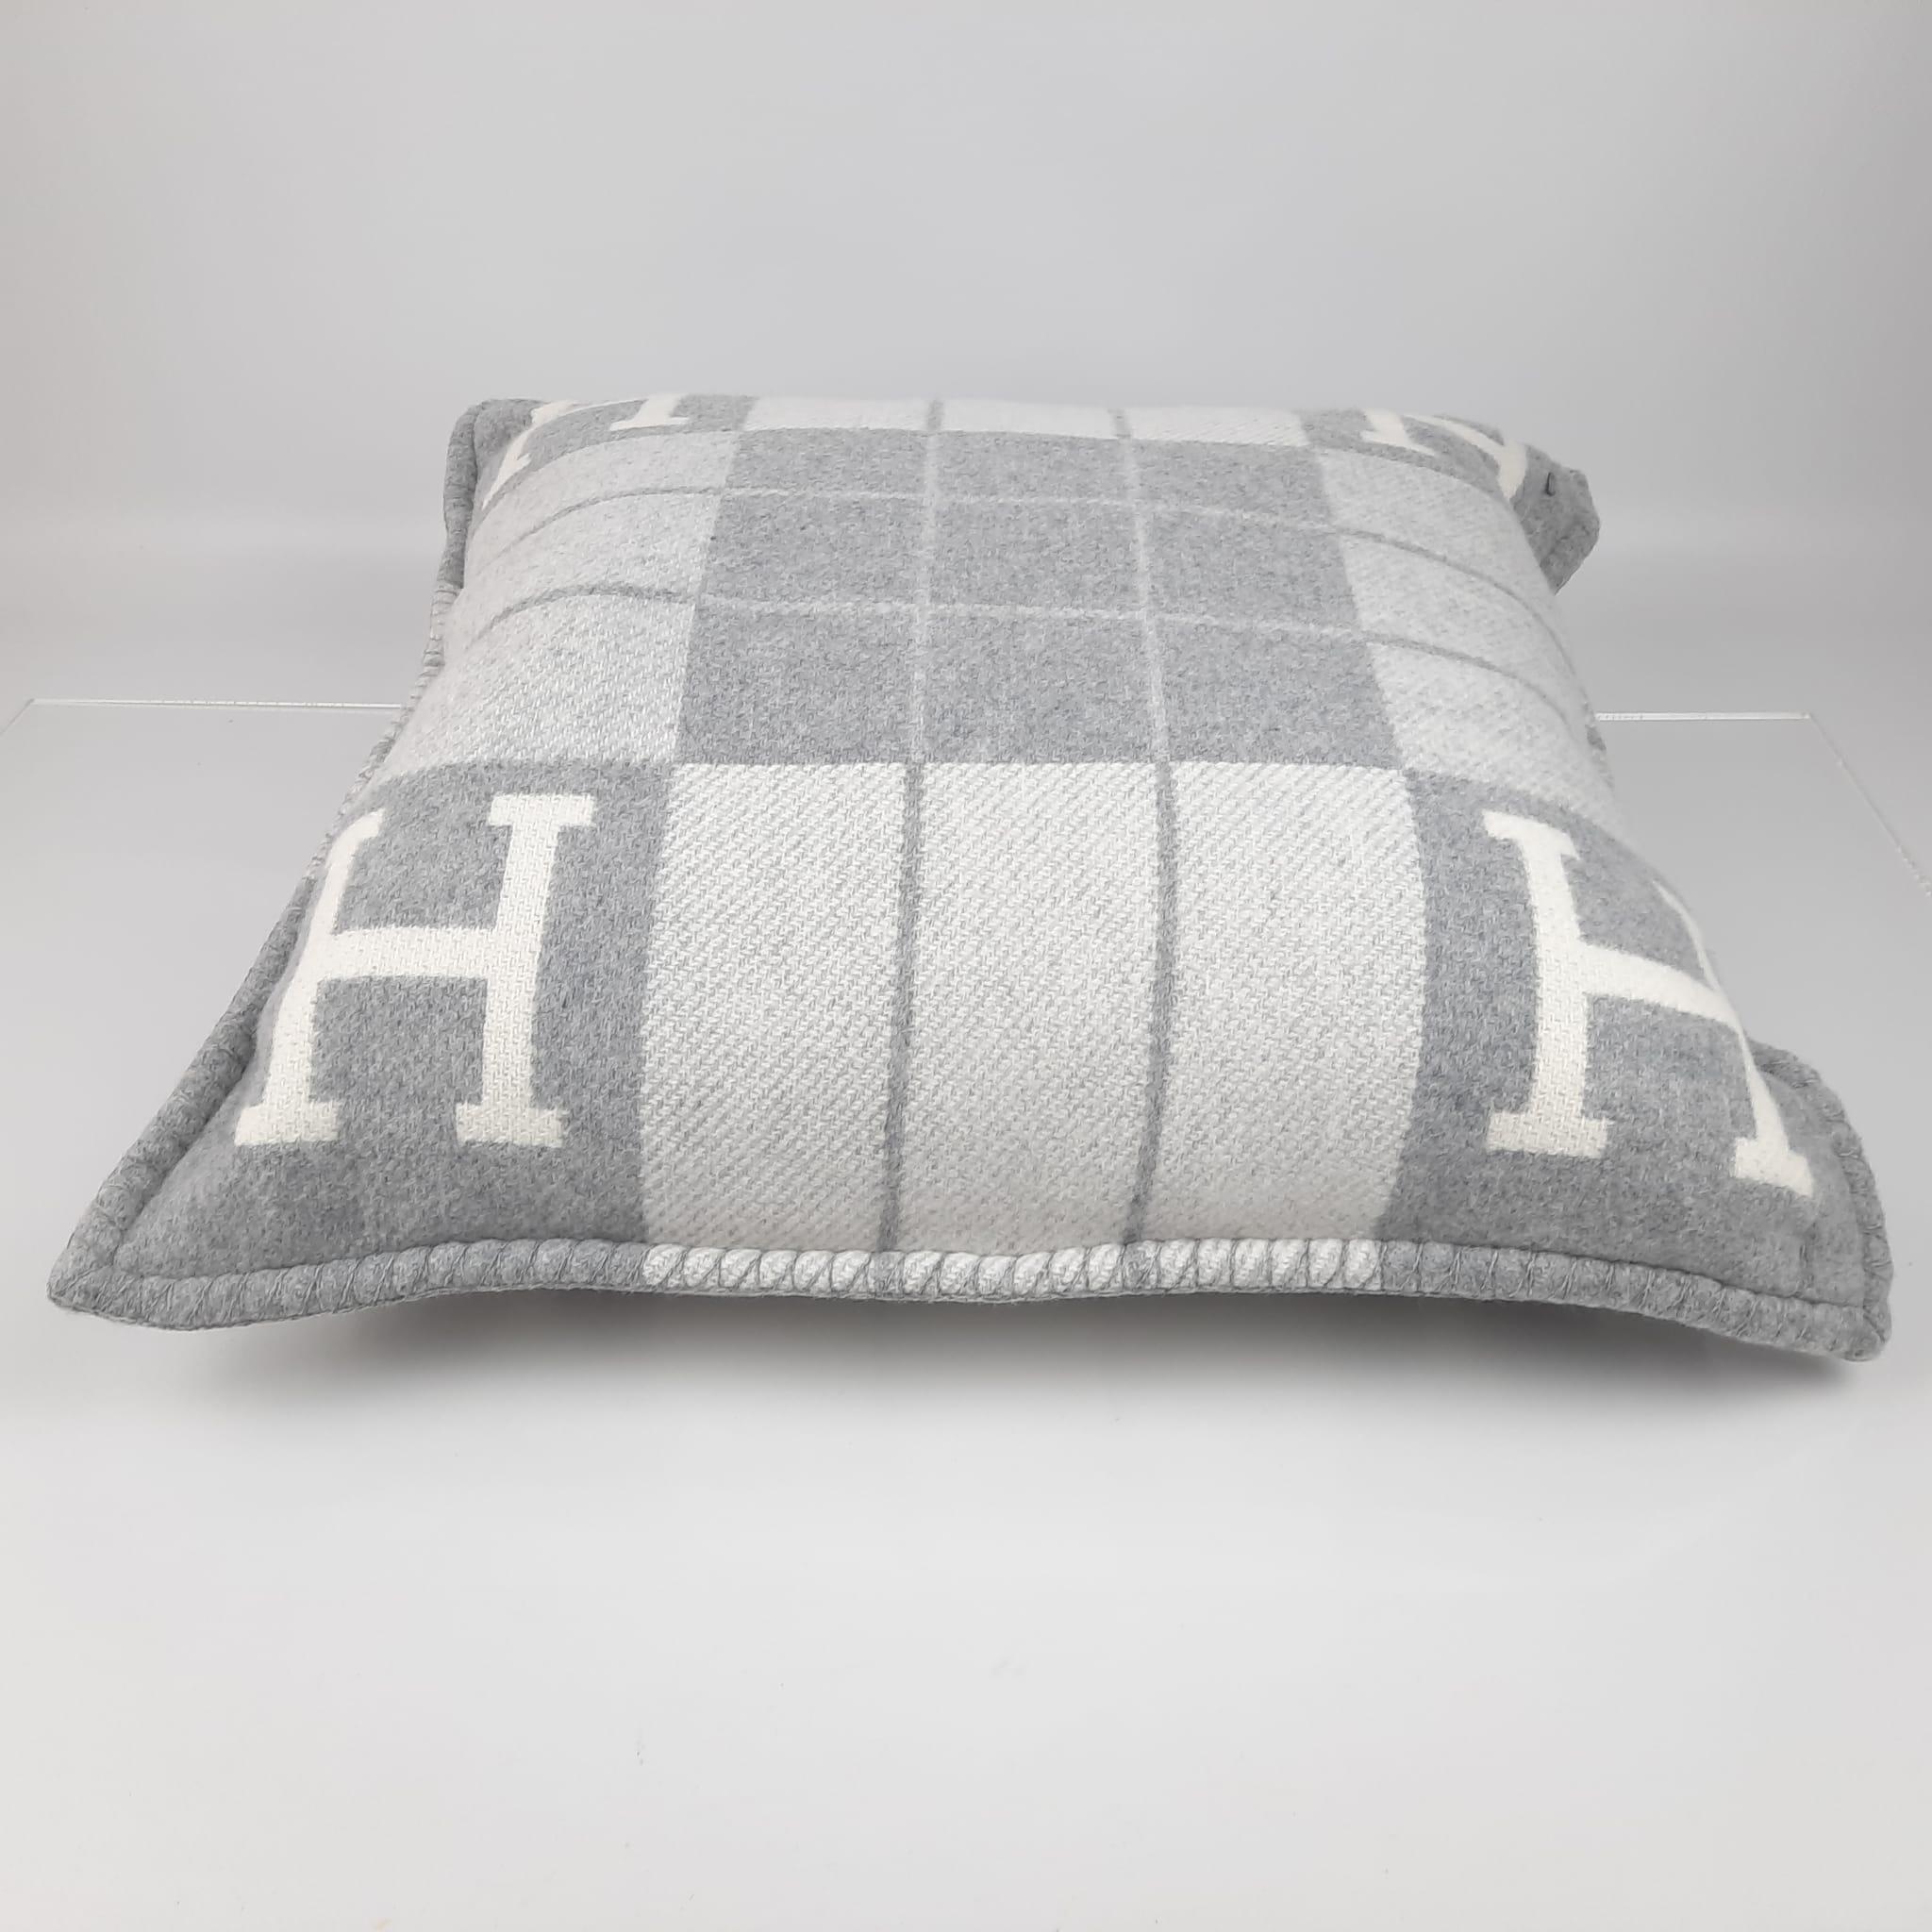 Removable cushion with jacquard woven cover in merino wool and cashmere, cover 90% merino wool and 10% cashmere. Hypoallergenic polyester filling
Saddle stitch finish
Designed by Studio Hermès